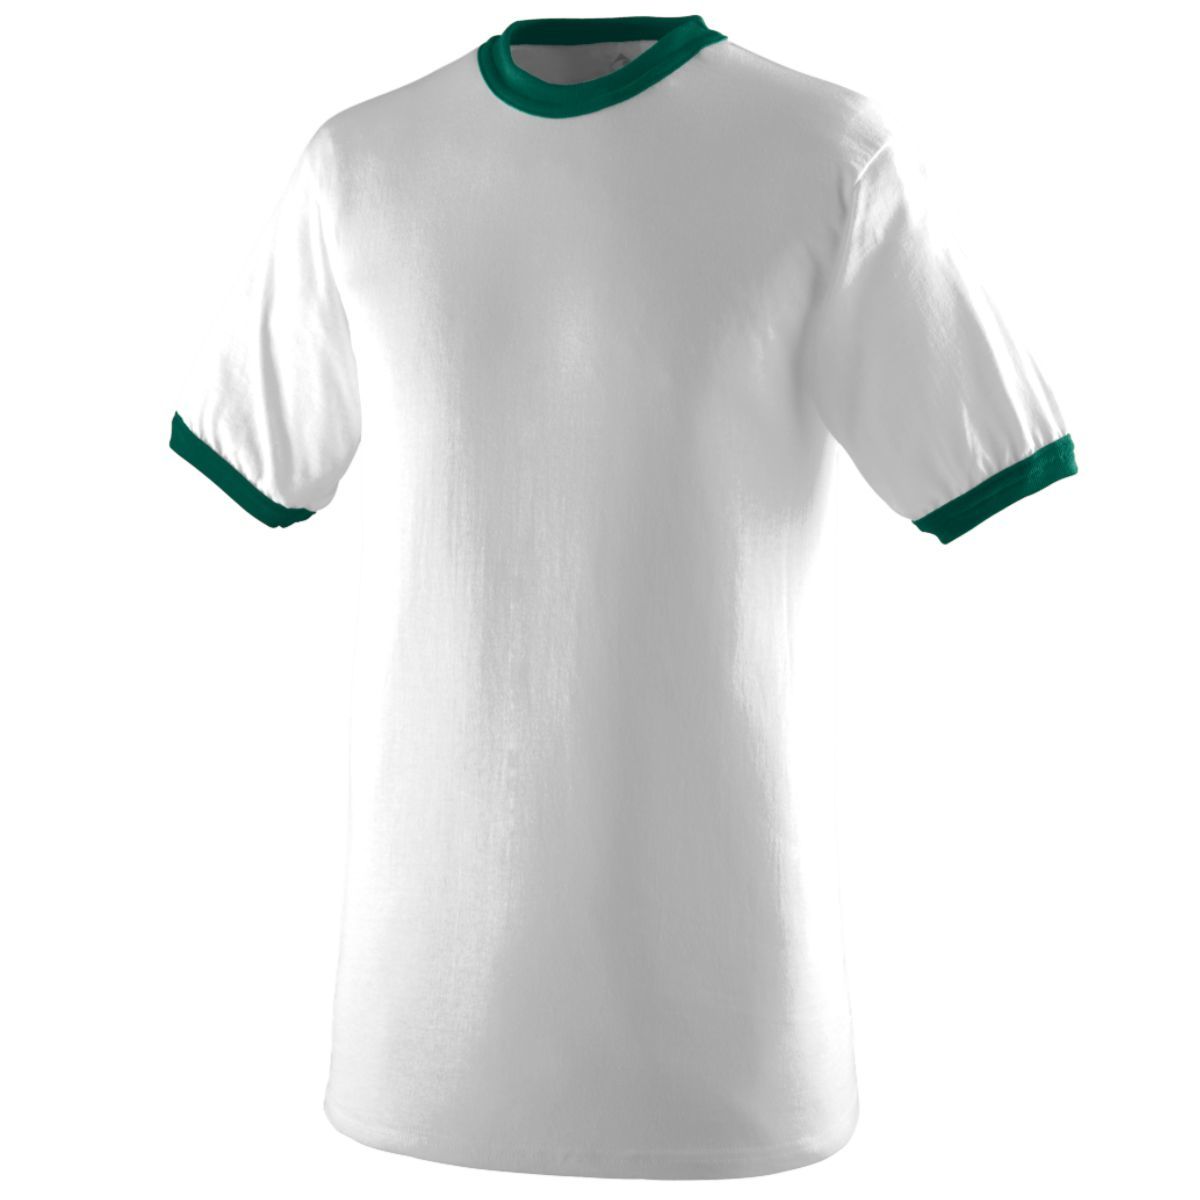 Augusta Sportswear Youth-Ringer T-Shirt in White/Dark Green  -Part of the Youth, Youth-Tee-Shirt, T-Shirts, Augusta-Products, Soccer, Shirts, All-Sports-1 product lines at KanaleyCreations.com